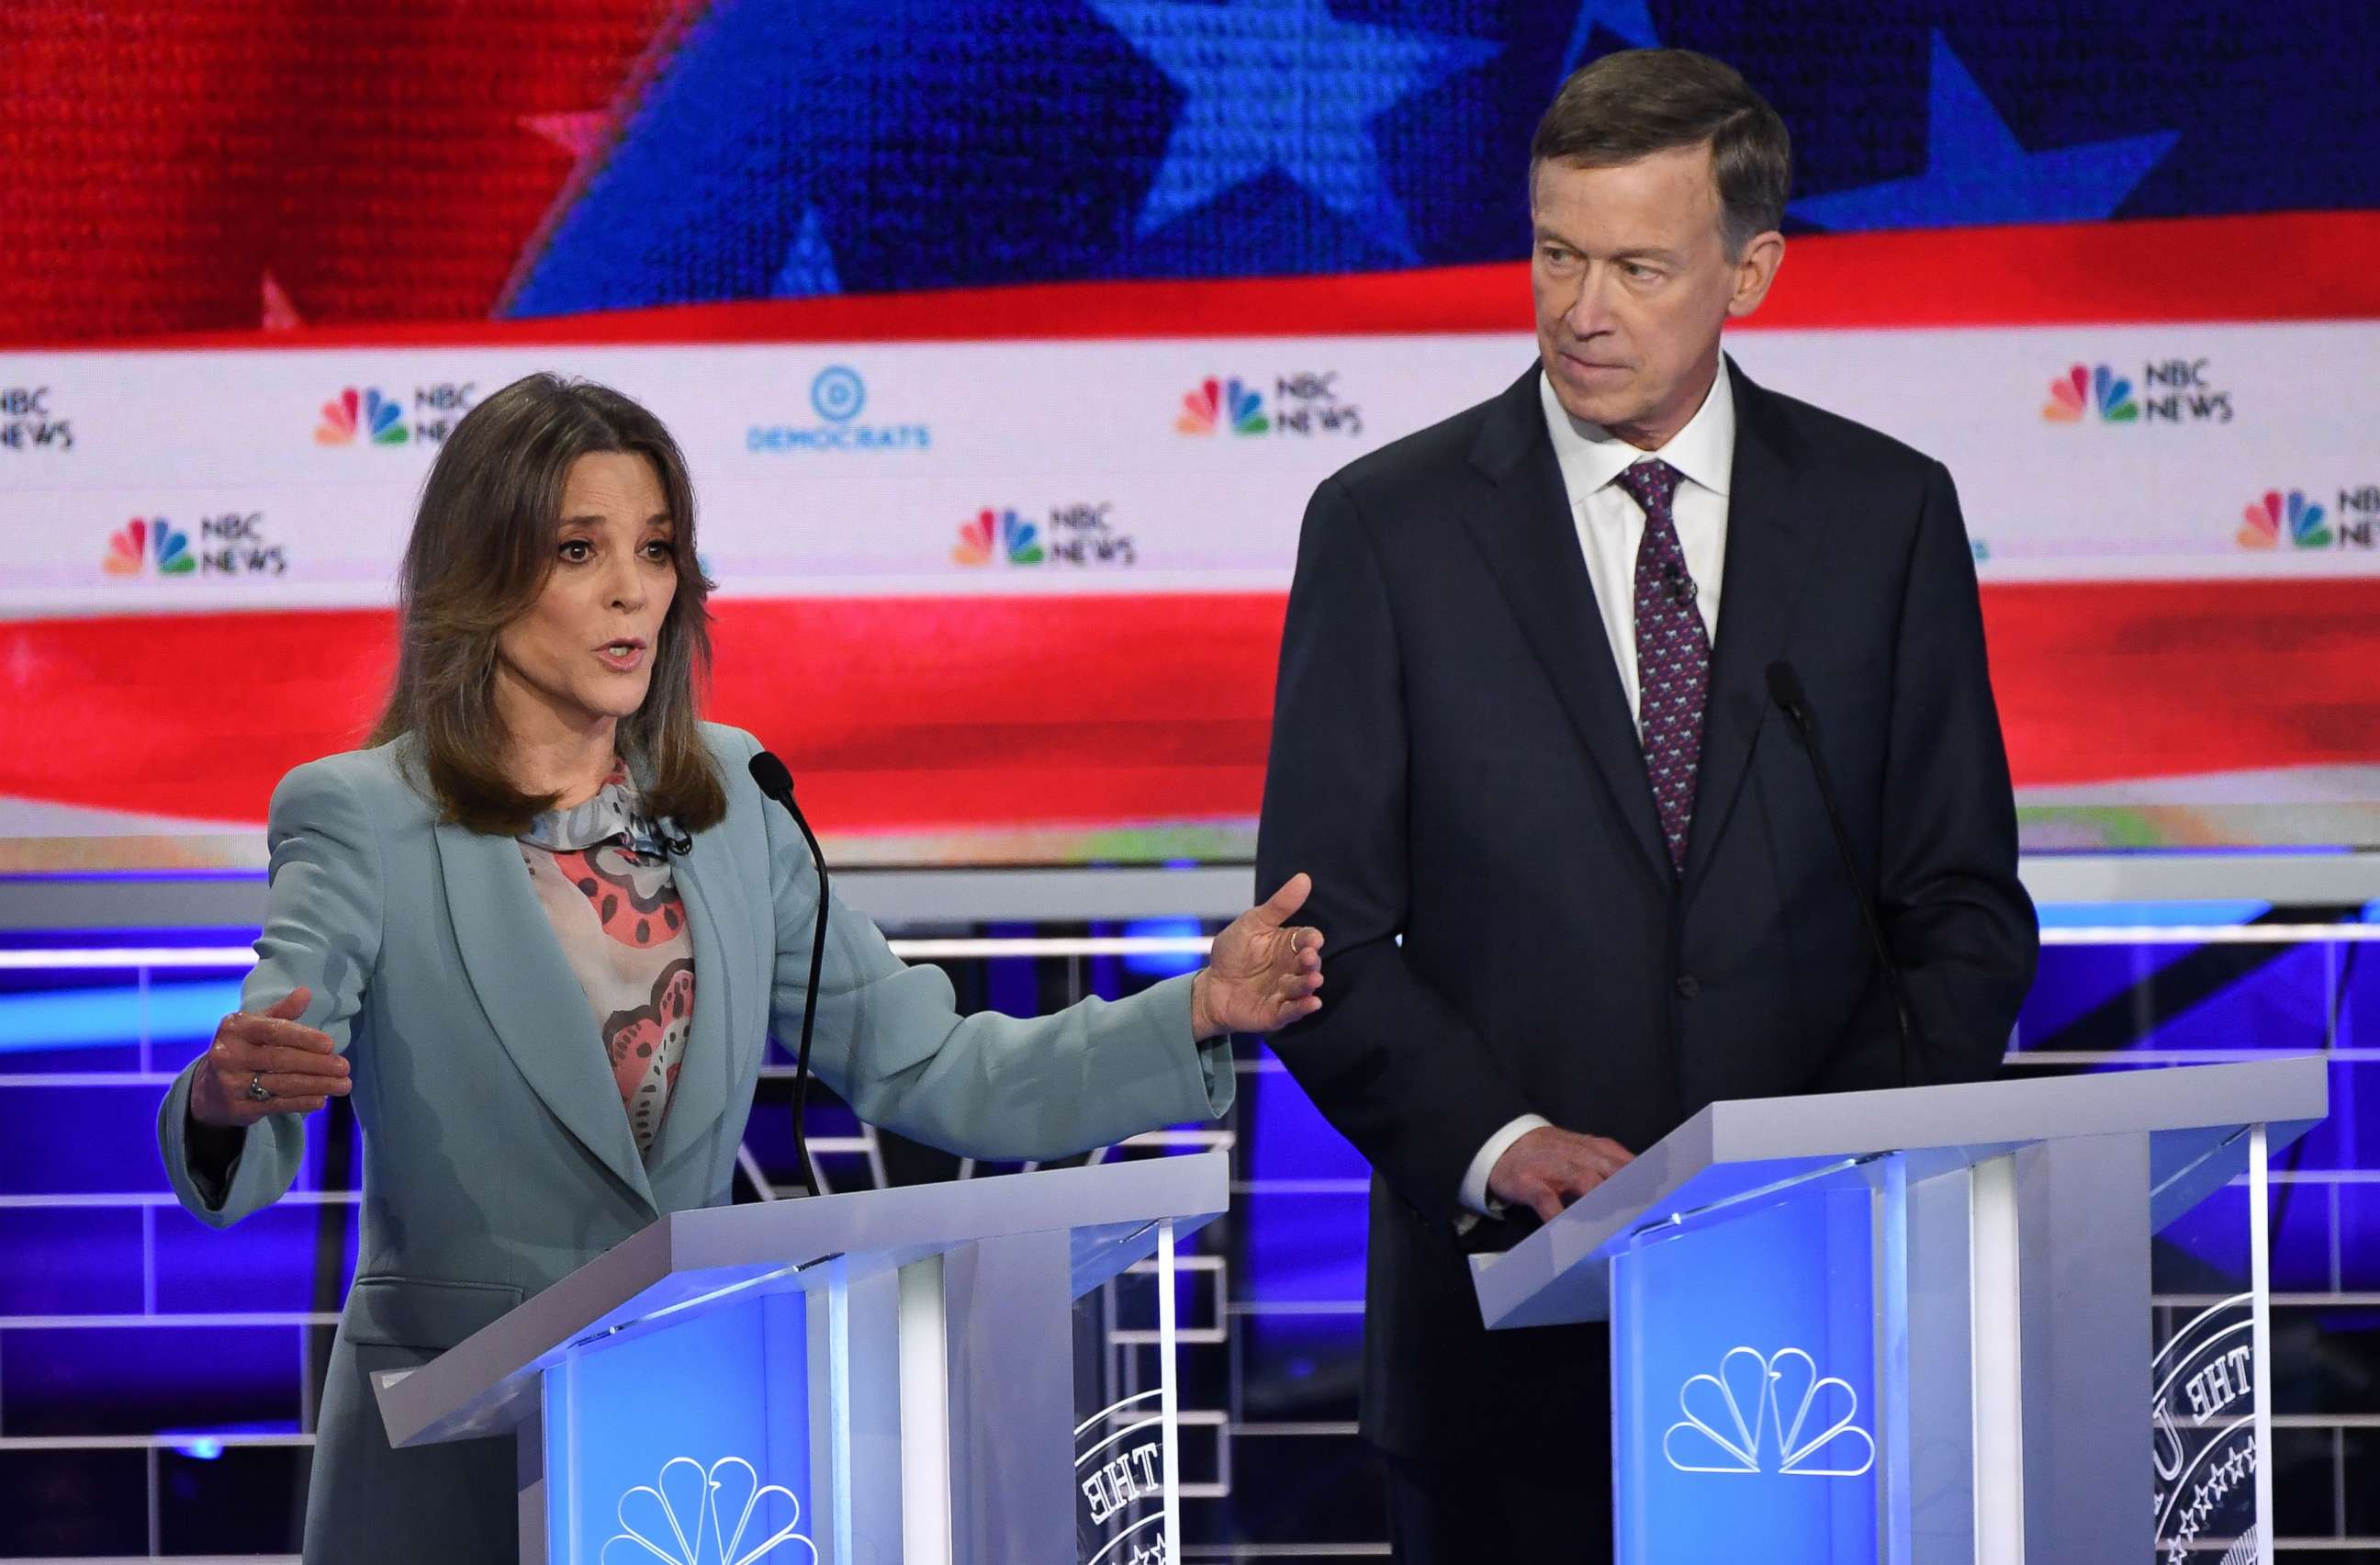 PHOTO: Marianne Williamson and John Hickenlooper participate in the second night of the first 2020 democratic presidential debate at the Adrienne Arsht Center for the Performing Arts in Miami, June 27, 2019.